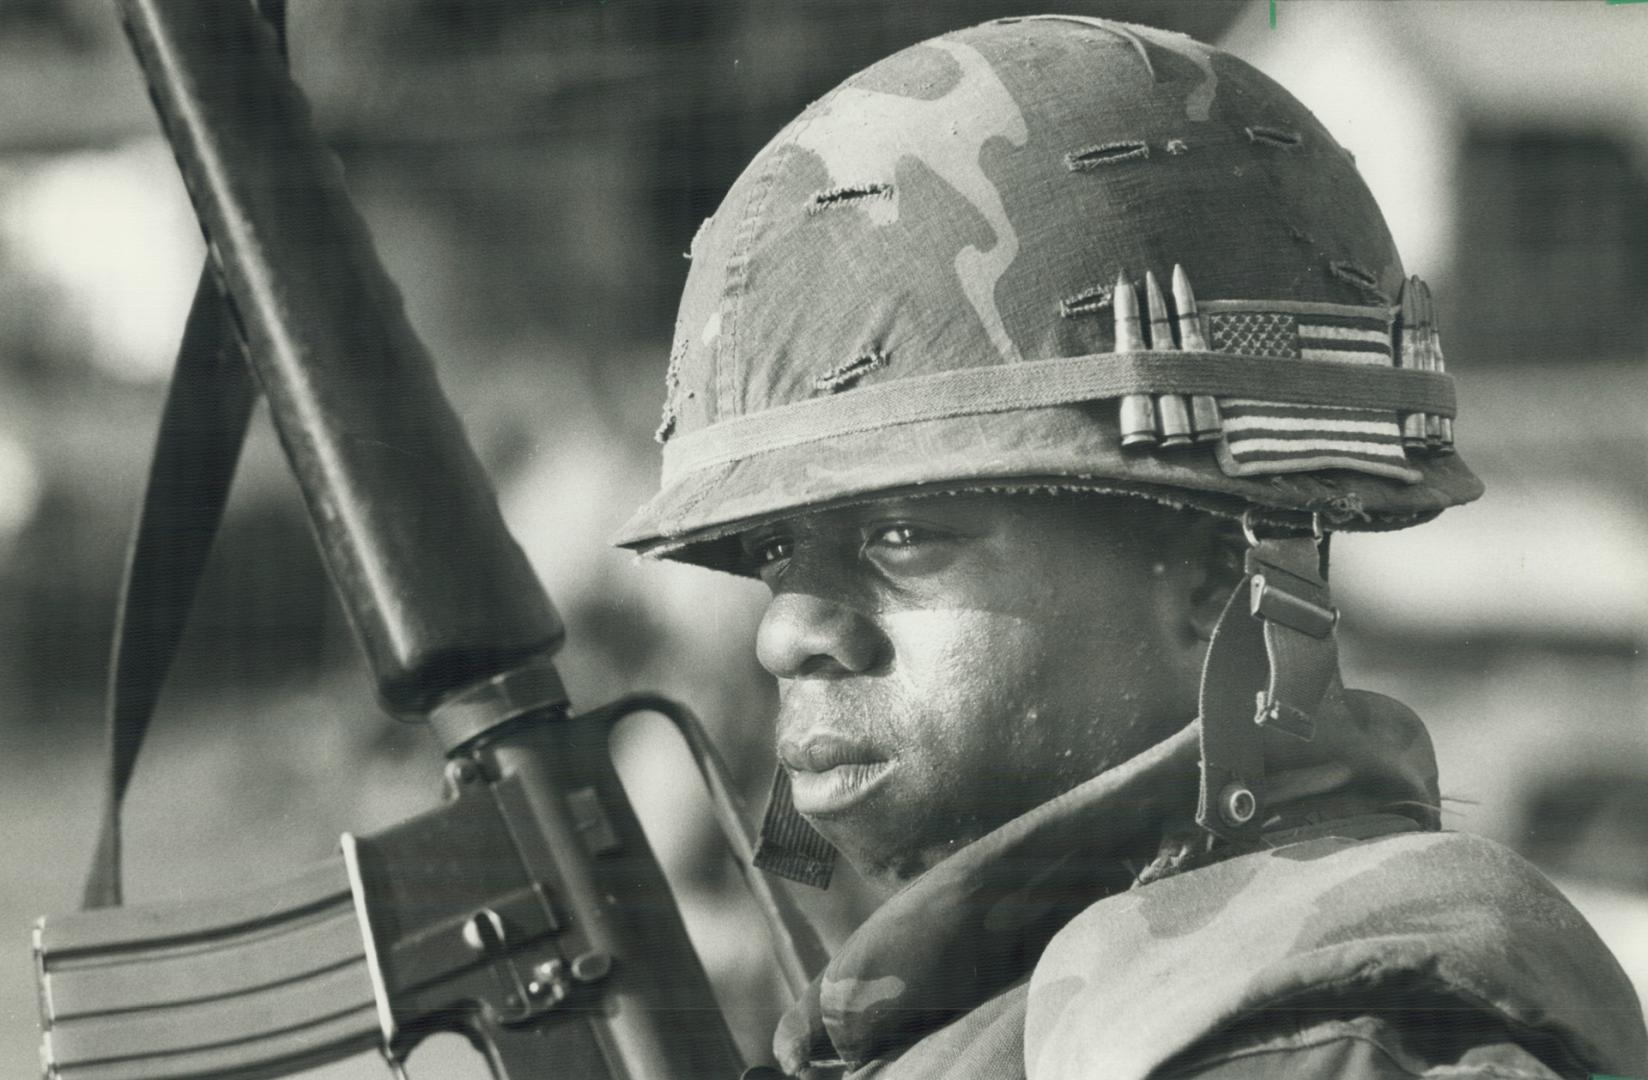 Grenada Guard, A U.S. Marine stands guard at one of the main bridges on the road leading to St. George's during the American invasion of Grenada